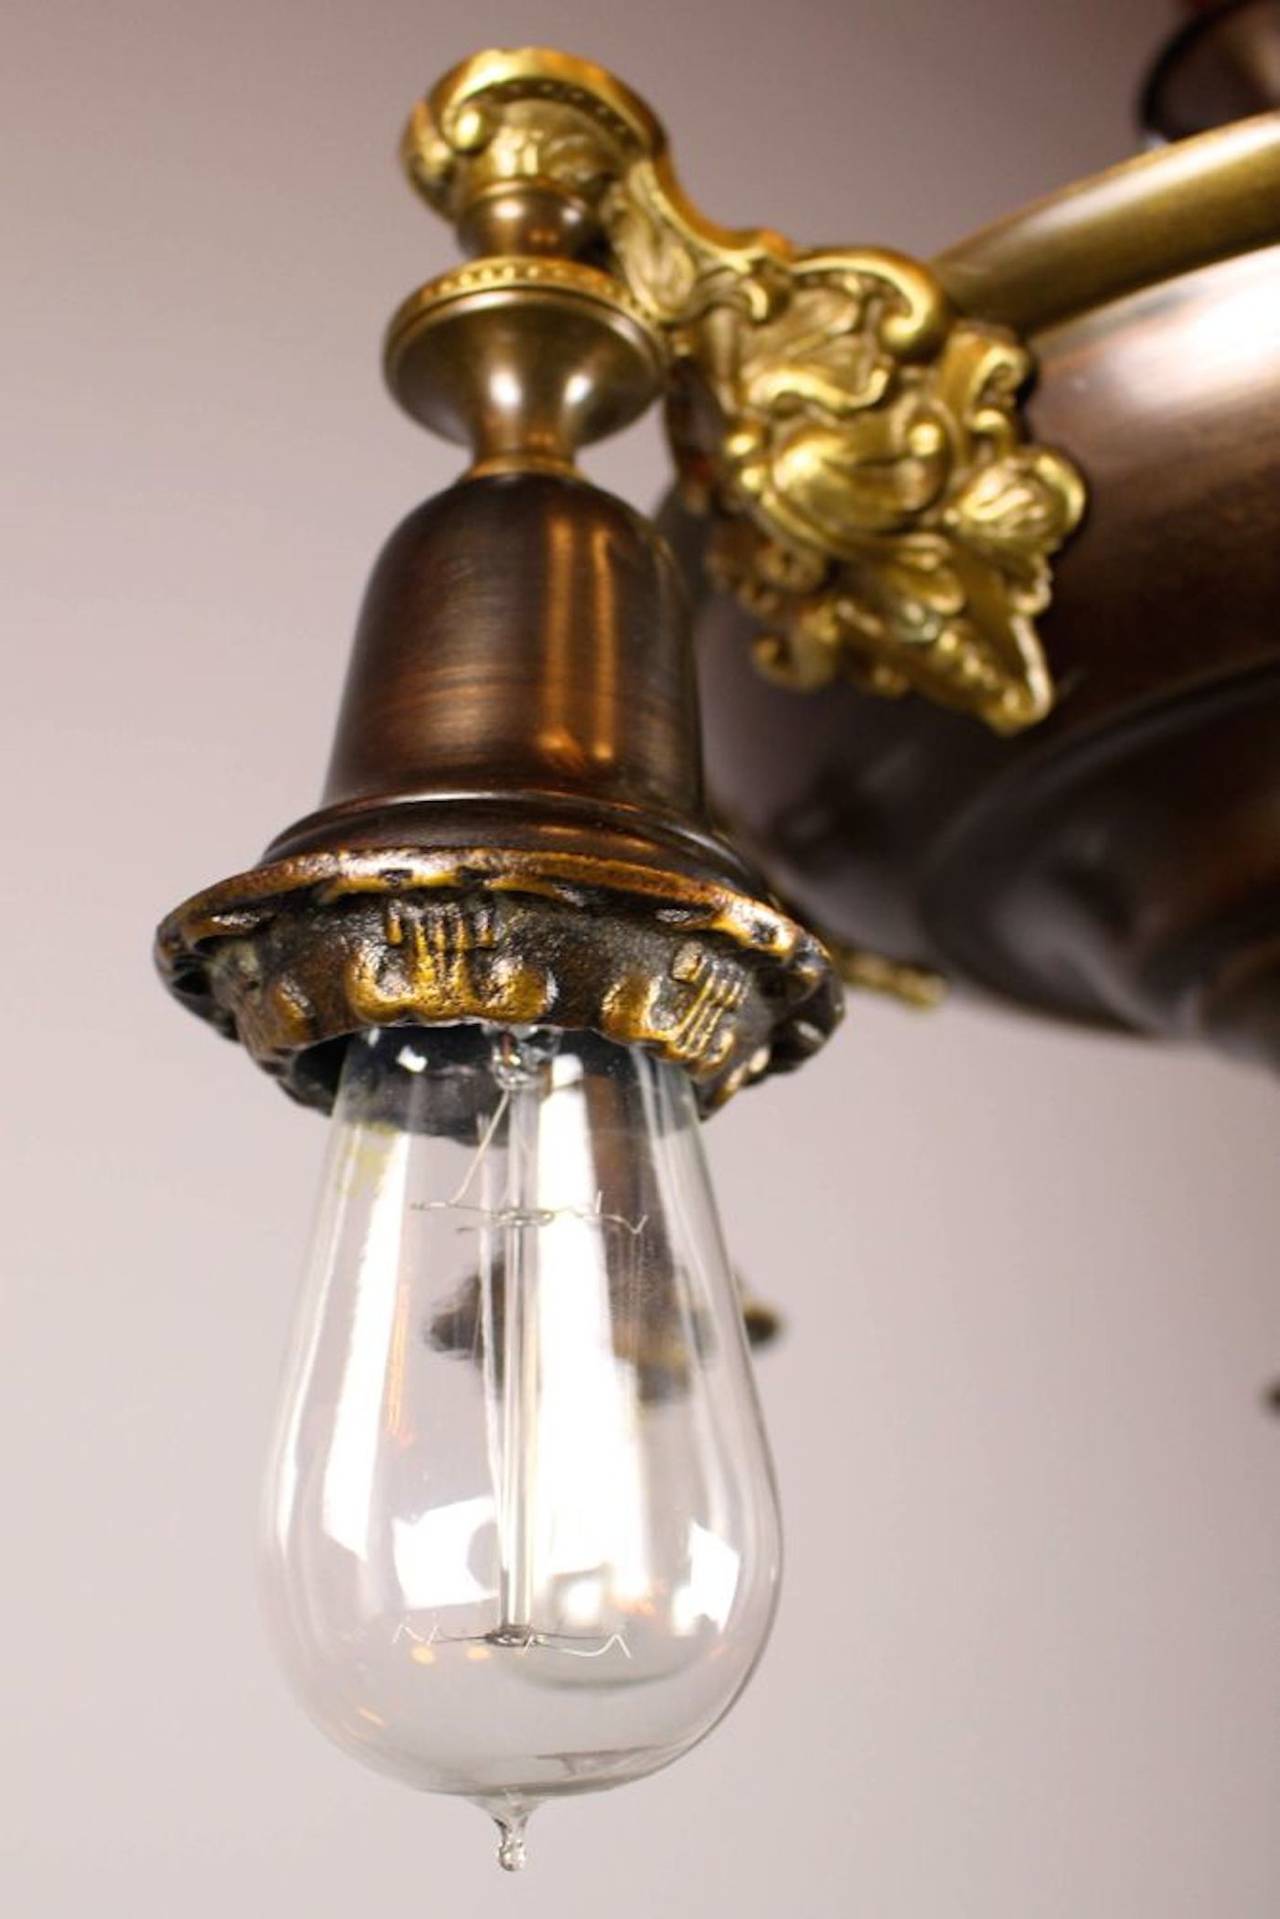 Two-Tone Edwardian Five-Light Pan Fixture with Bare Bulbs 2